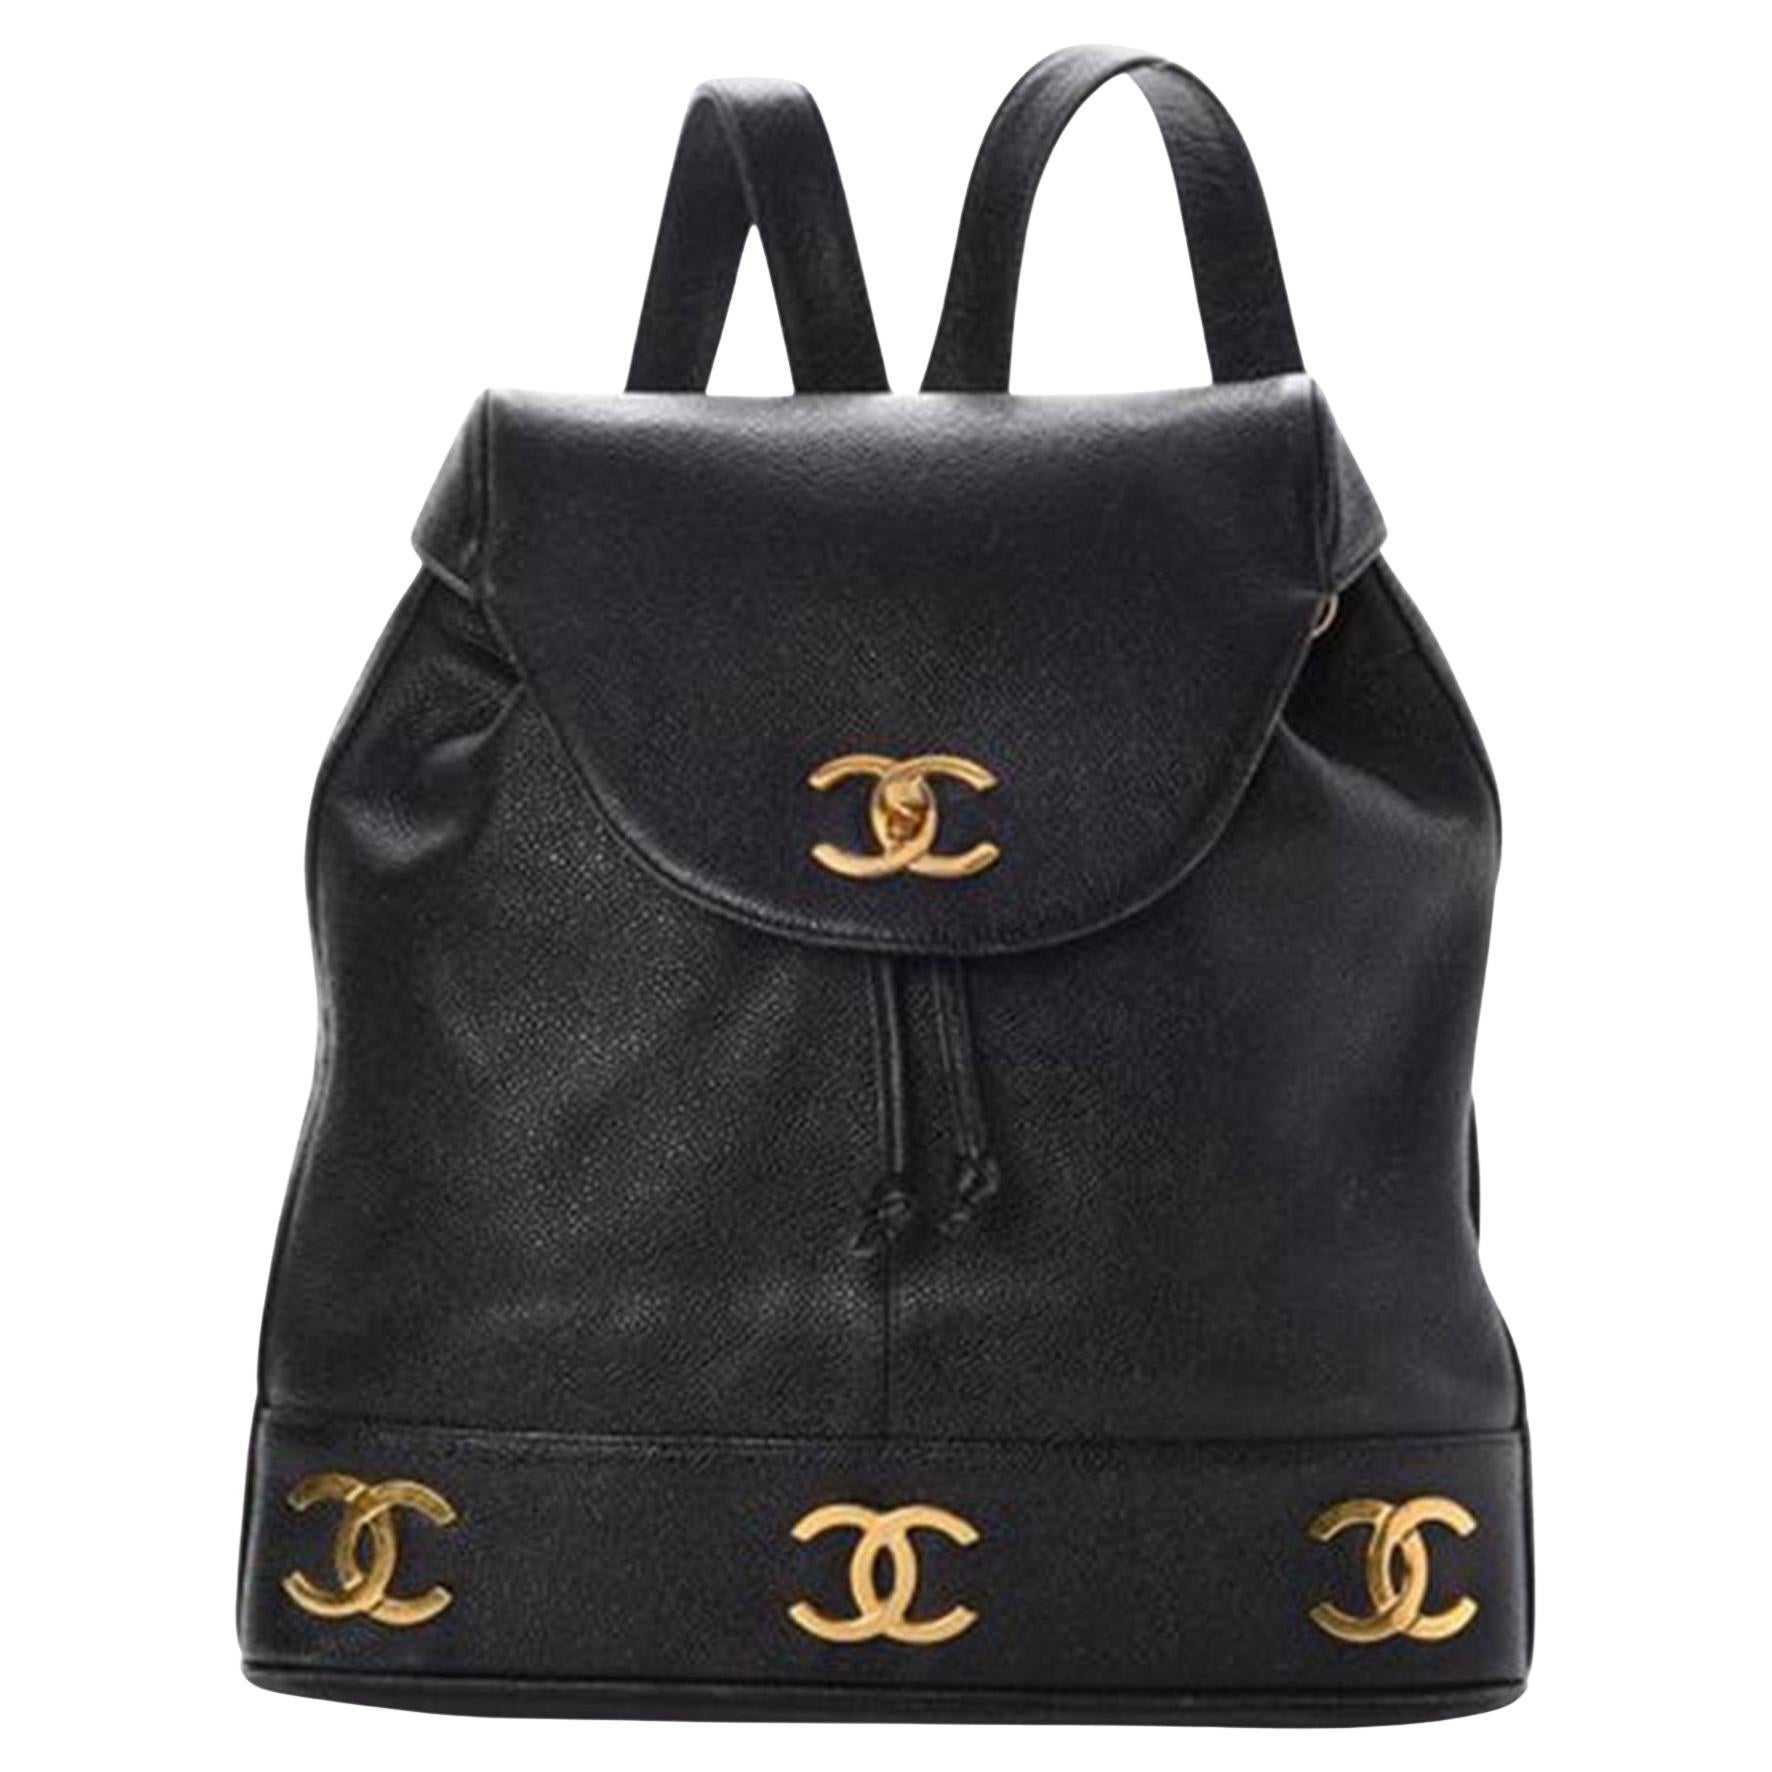 Chanel Vintage 1992 Drawstring  CC Rucksack Black Caviar Leather Backpack In Good Condition For Sale In Miami, FL